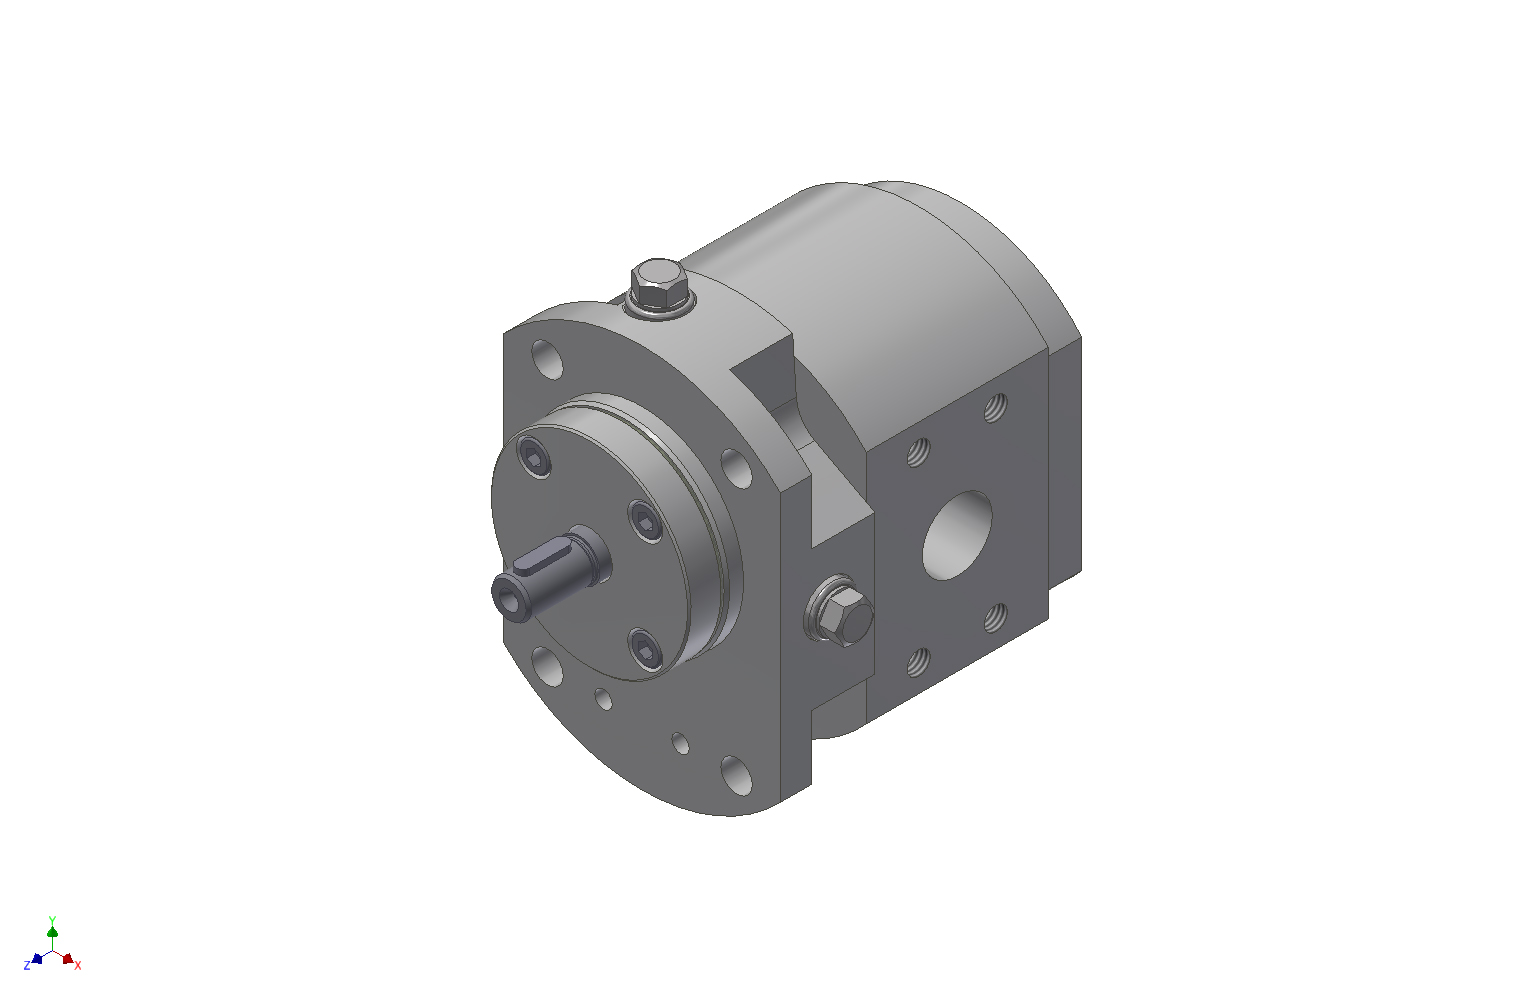 The new Maag F Series gear pump has the same key components as previous models.